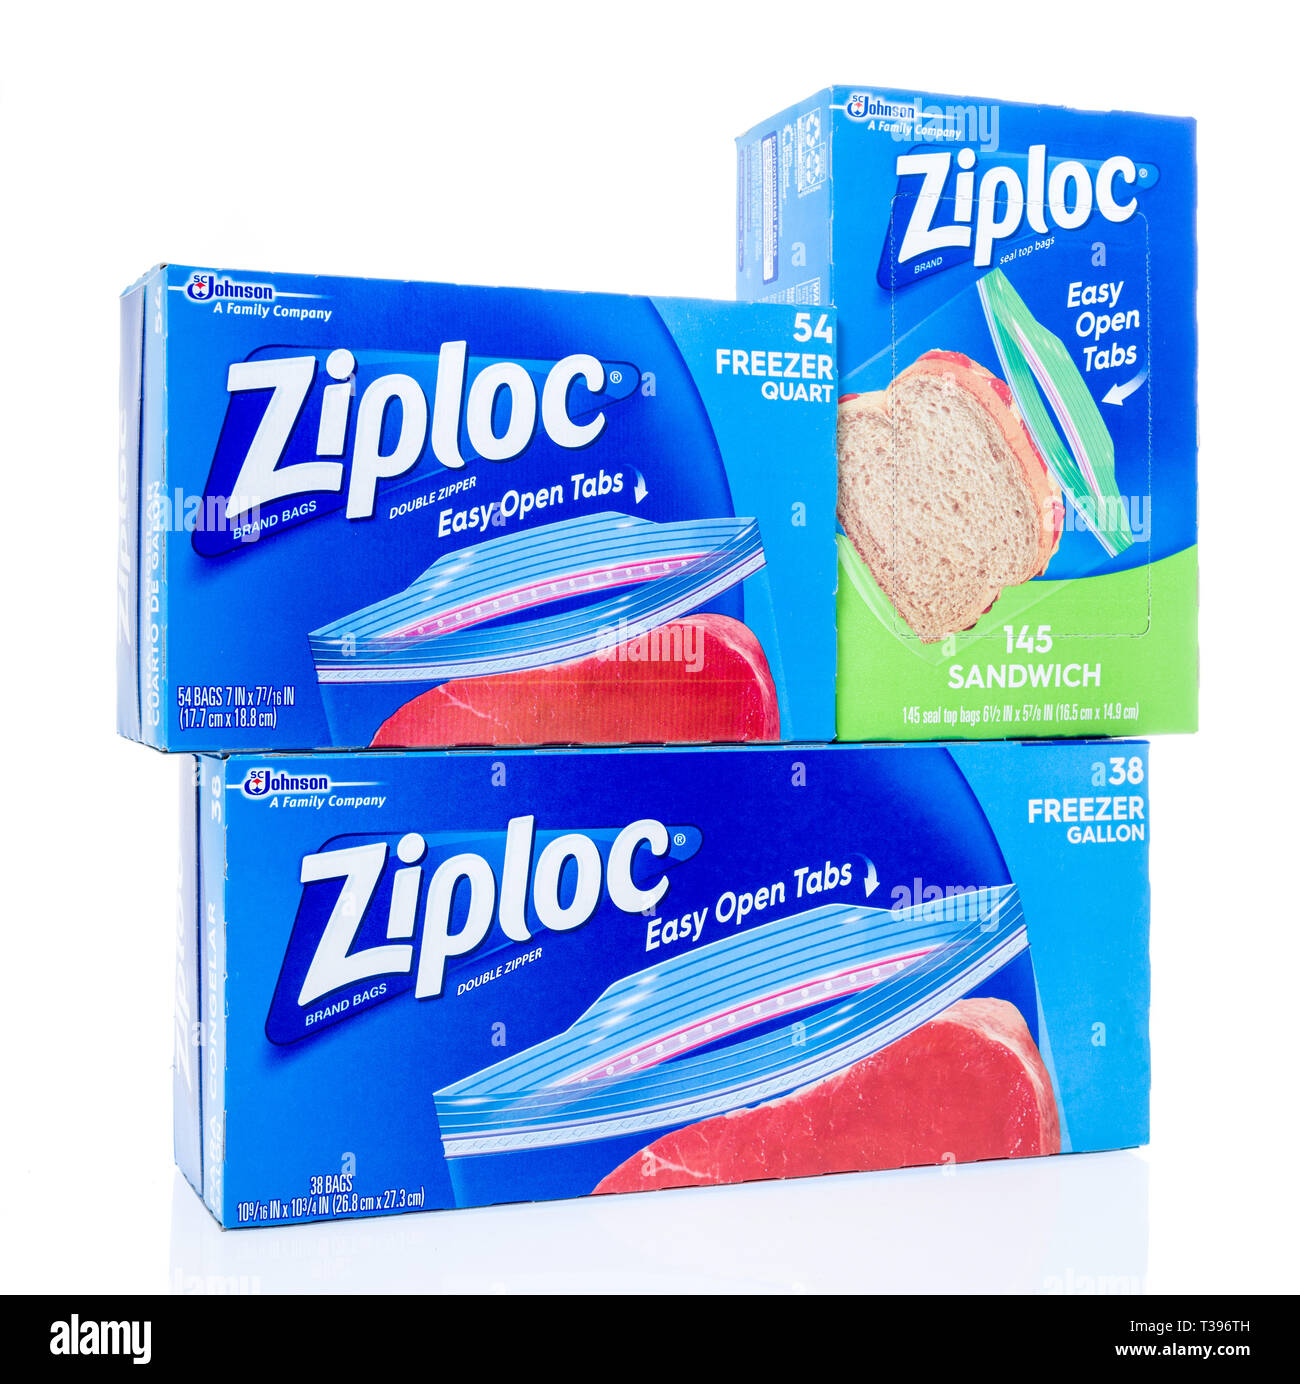 https://c8.alamy.com/comp/T396TH/winneconne-wi-7-april-2019-a-package-of-ziploc-brand-bags-double-zipper-with-easy-opne-tabs-in-sandiwch-quart-and-gallon-size-on-an-isolated-back-T396TH.jpg